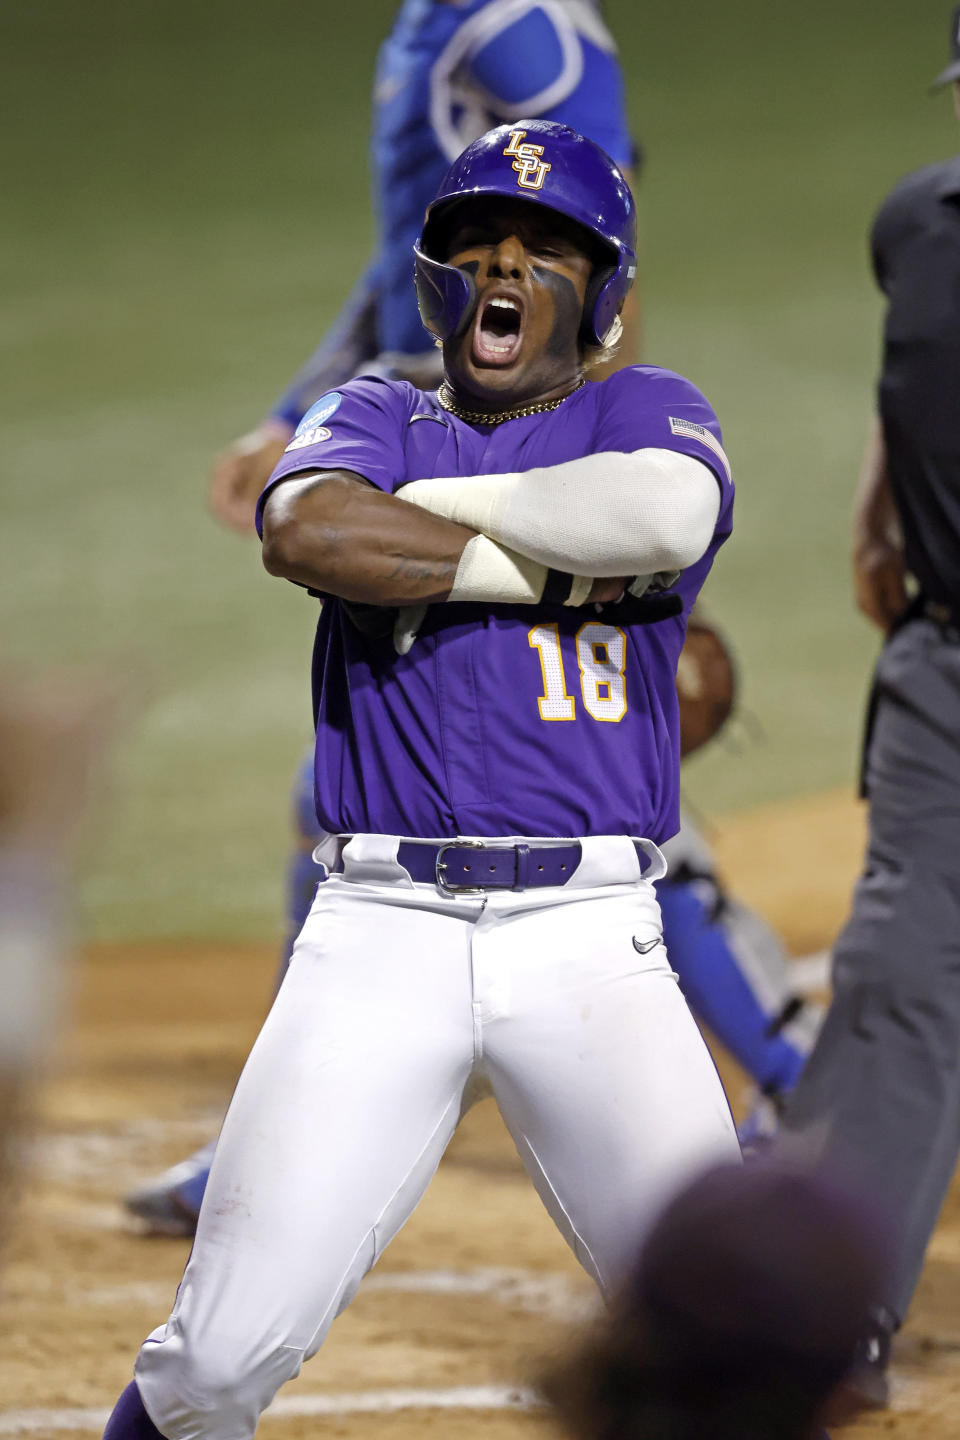 LSU first baseman Tre' Morgan (18) reacts after hitting a home run during the third inning of an NCAA college baseball tournament super regional game against Kentucky in Baton Rouge, La., Saturday, June 10, 2023. (AP Photo/Tyler Kaufman)